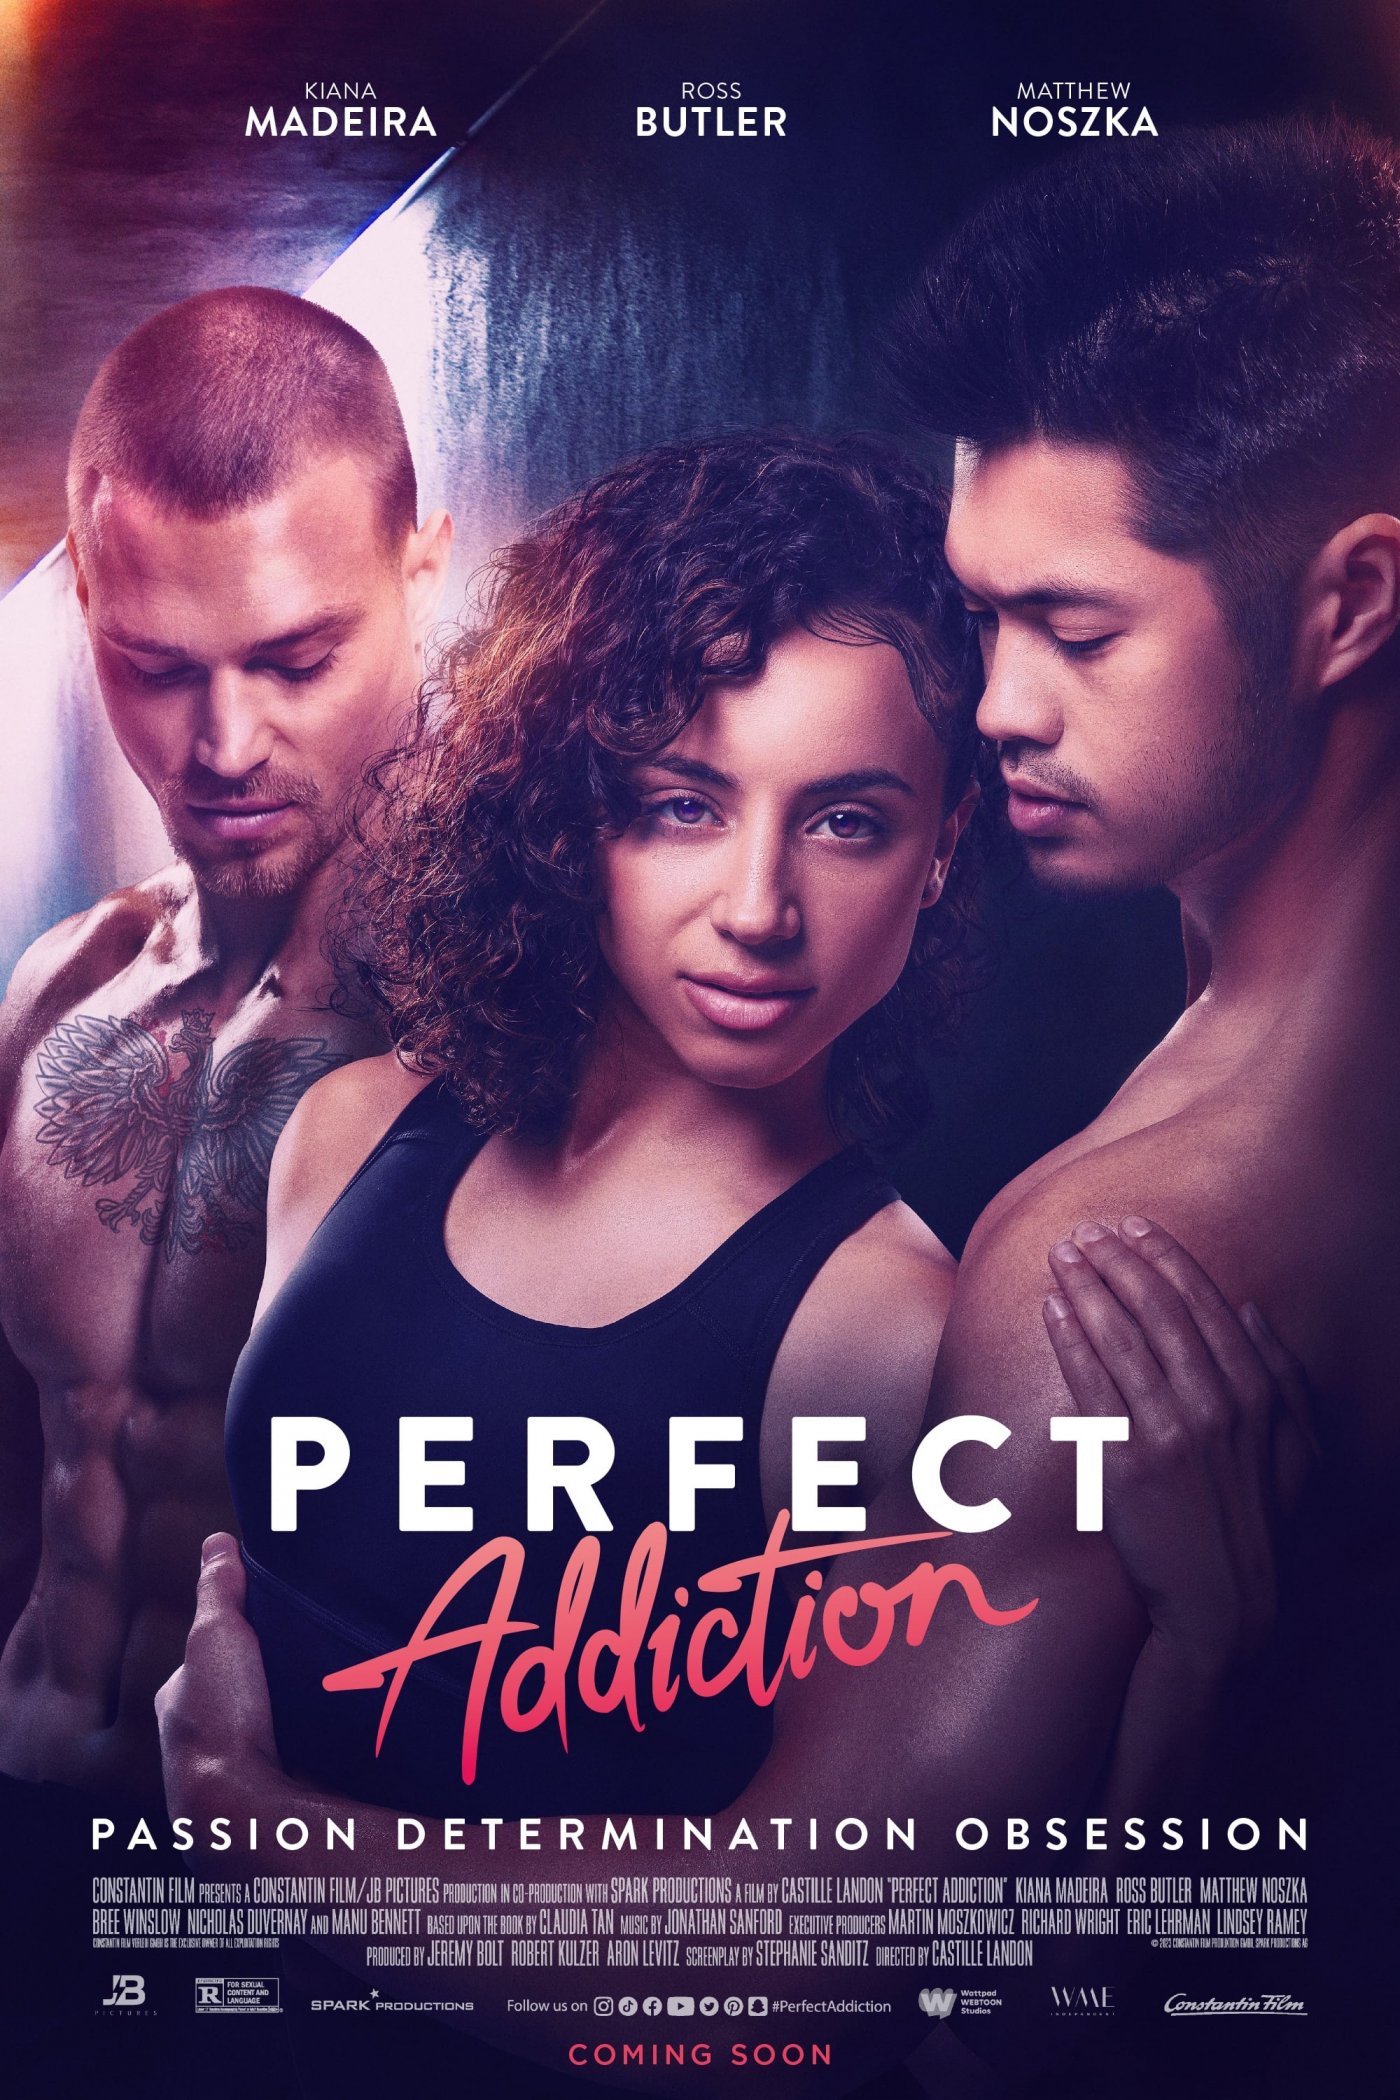 https://movieplayer.it/film/perfect-addiction_61624/